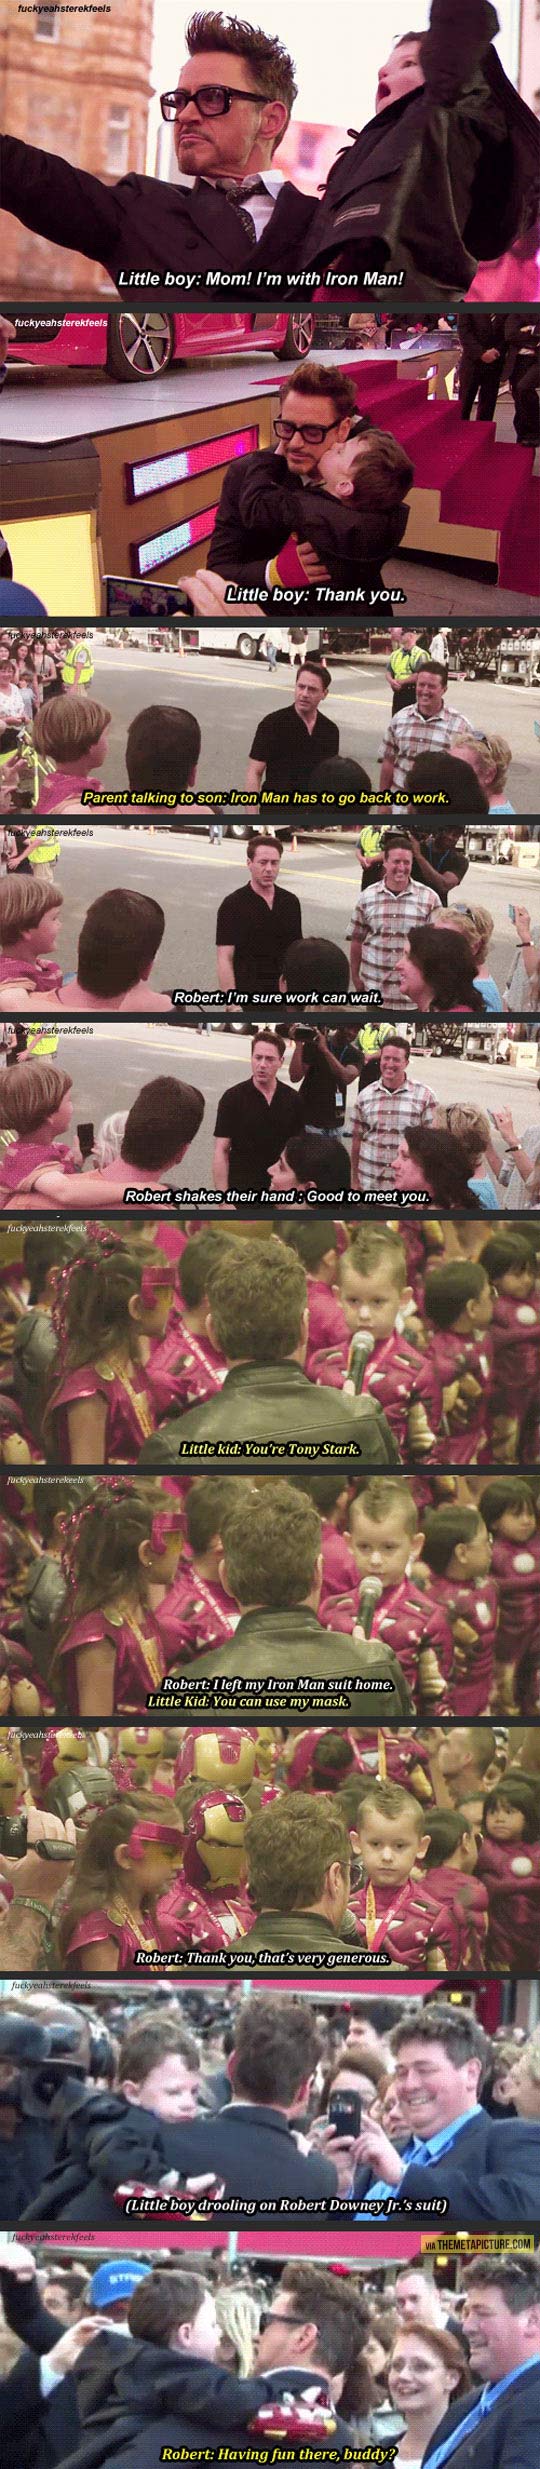 Robert Downey Jr. loves his young fans…